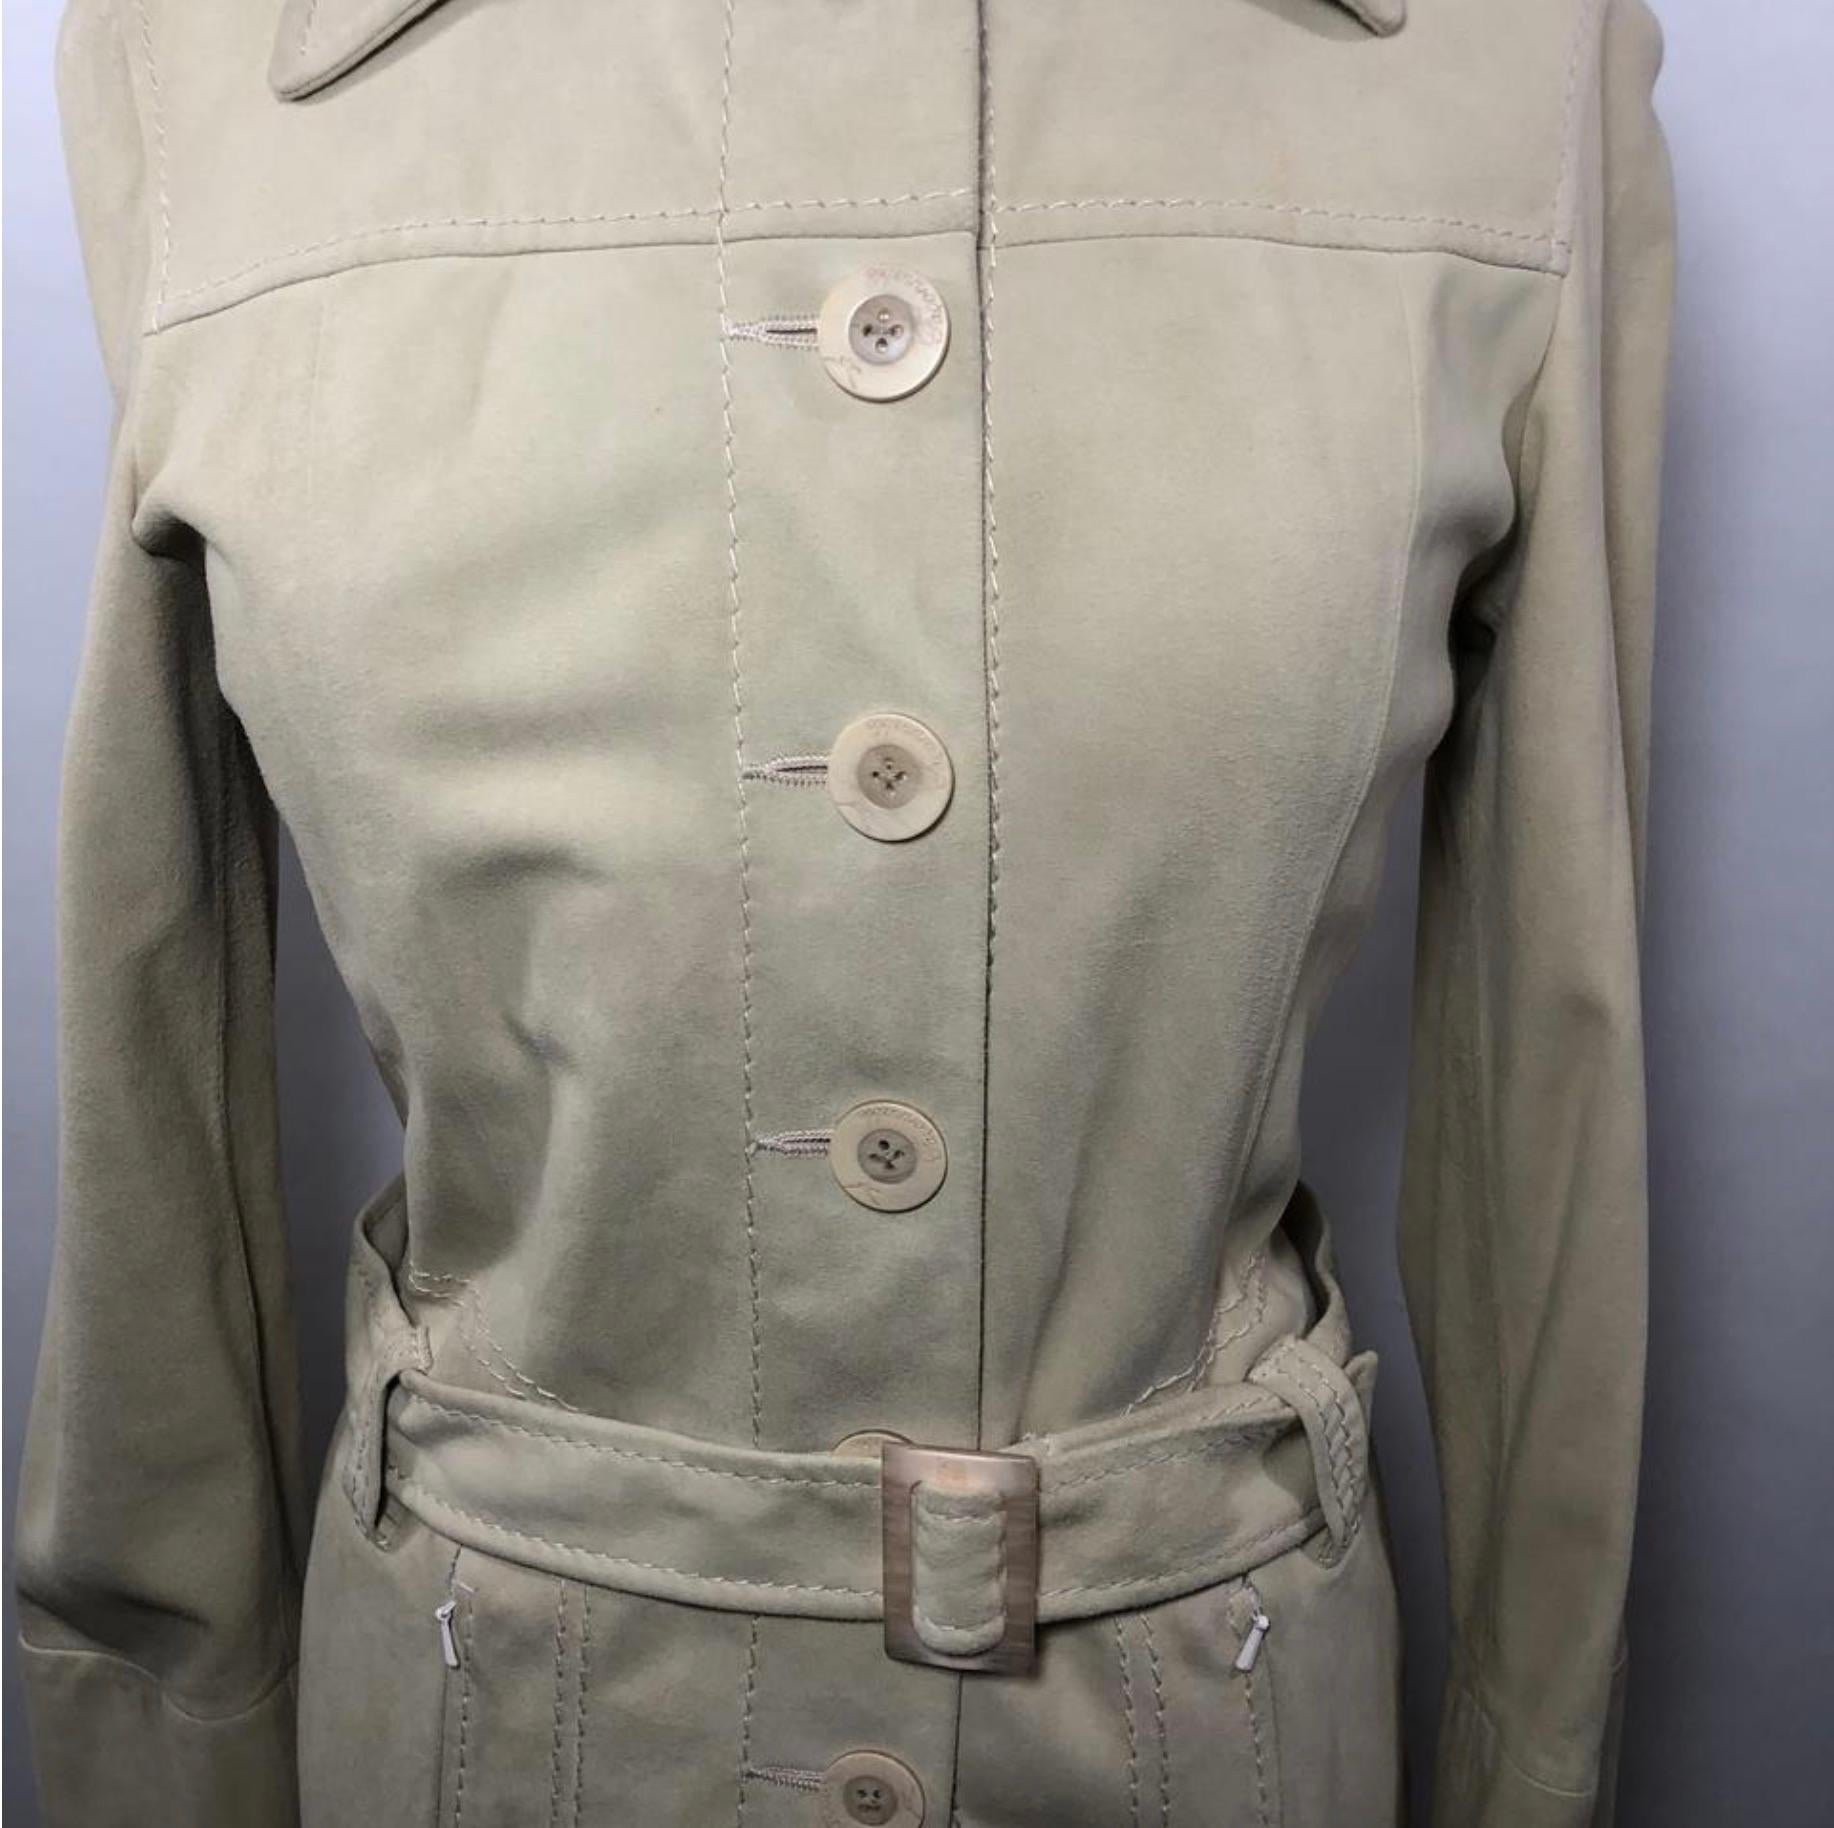 Faconnable Goatskin Fall or Spring Jacket with Belt In Excellent Condition For Sale In Saint Charles, IL